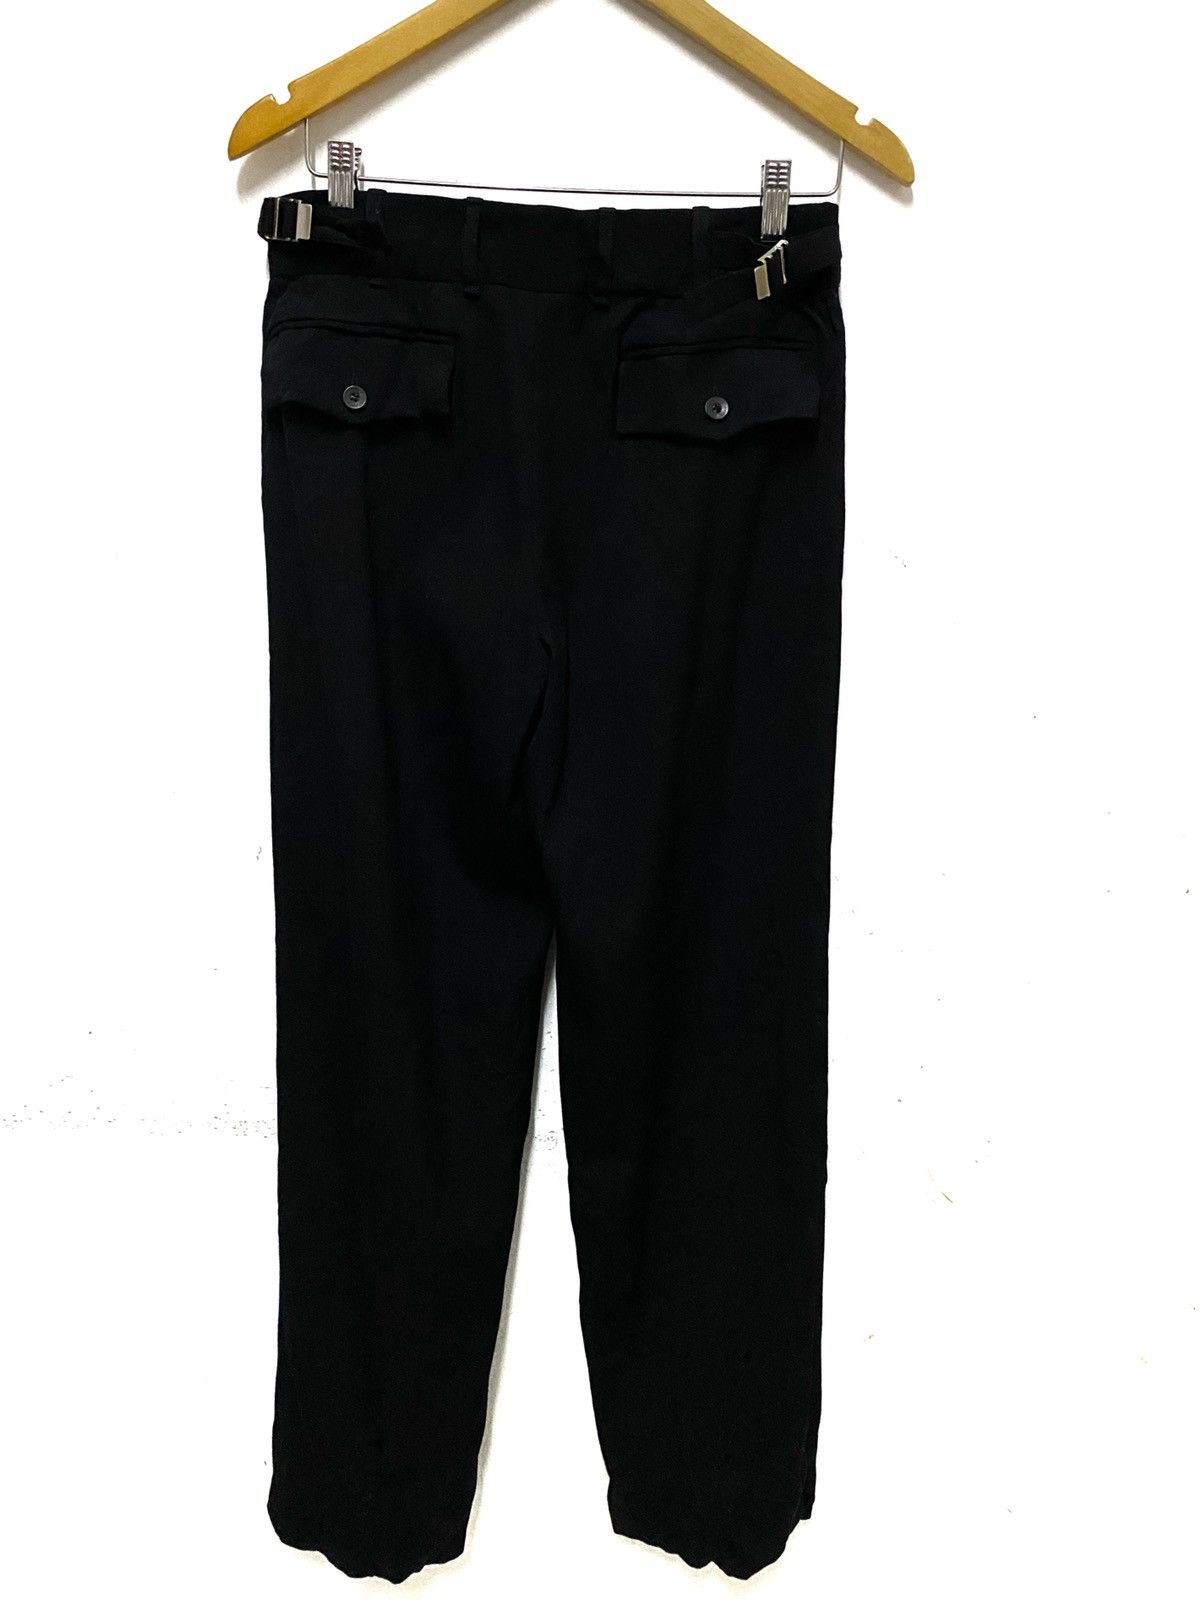 Gucci Lana Wool Pants Made in Italy - 6